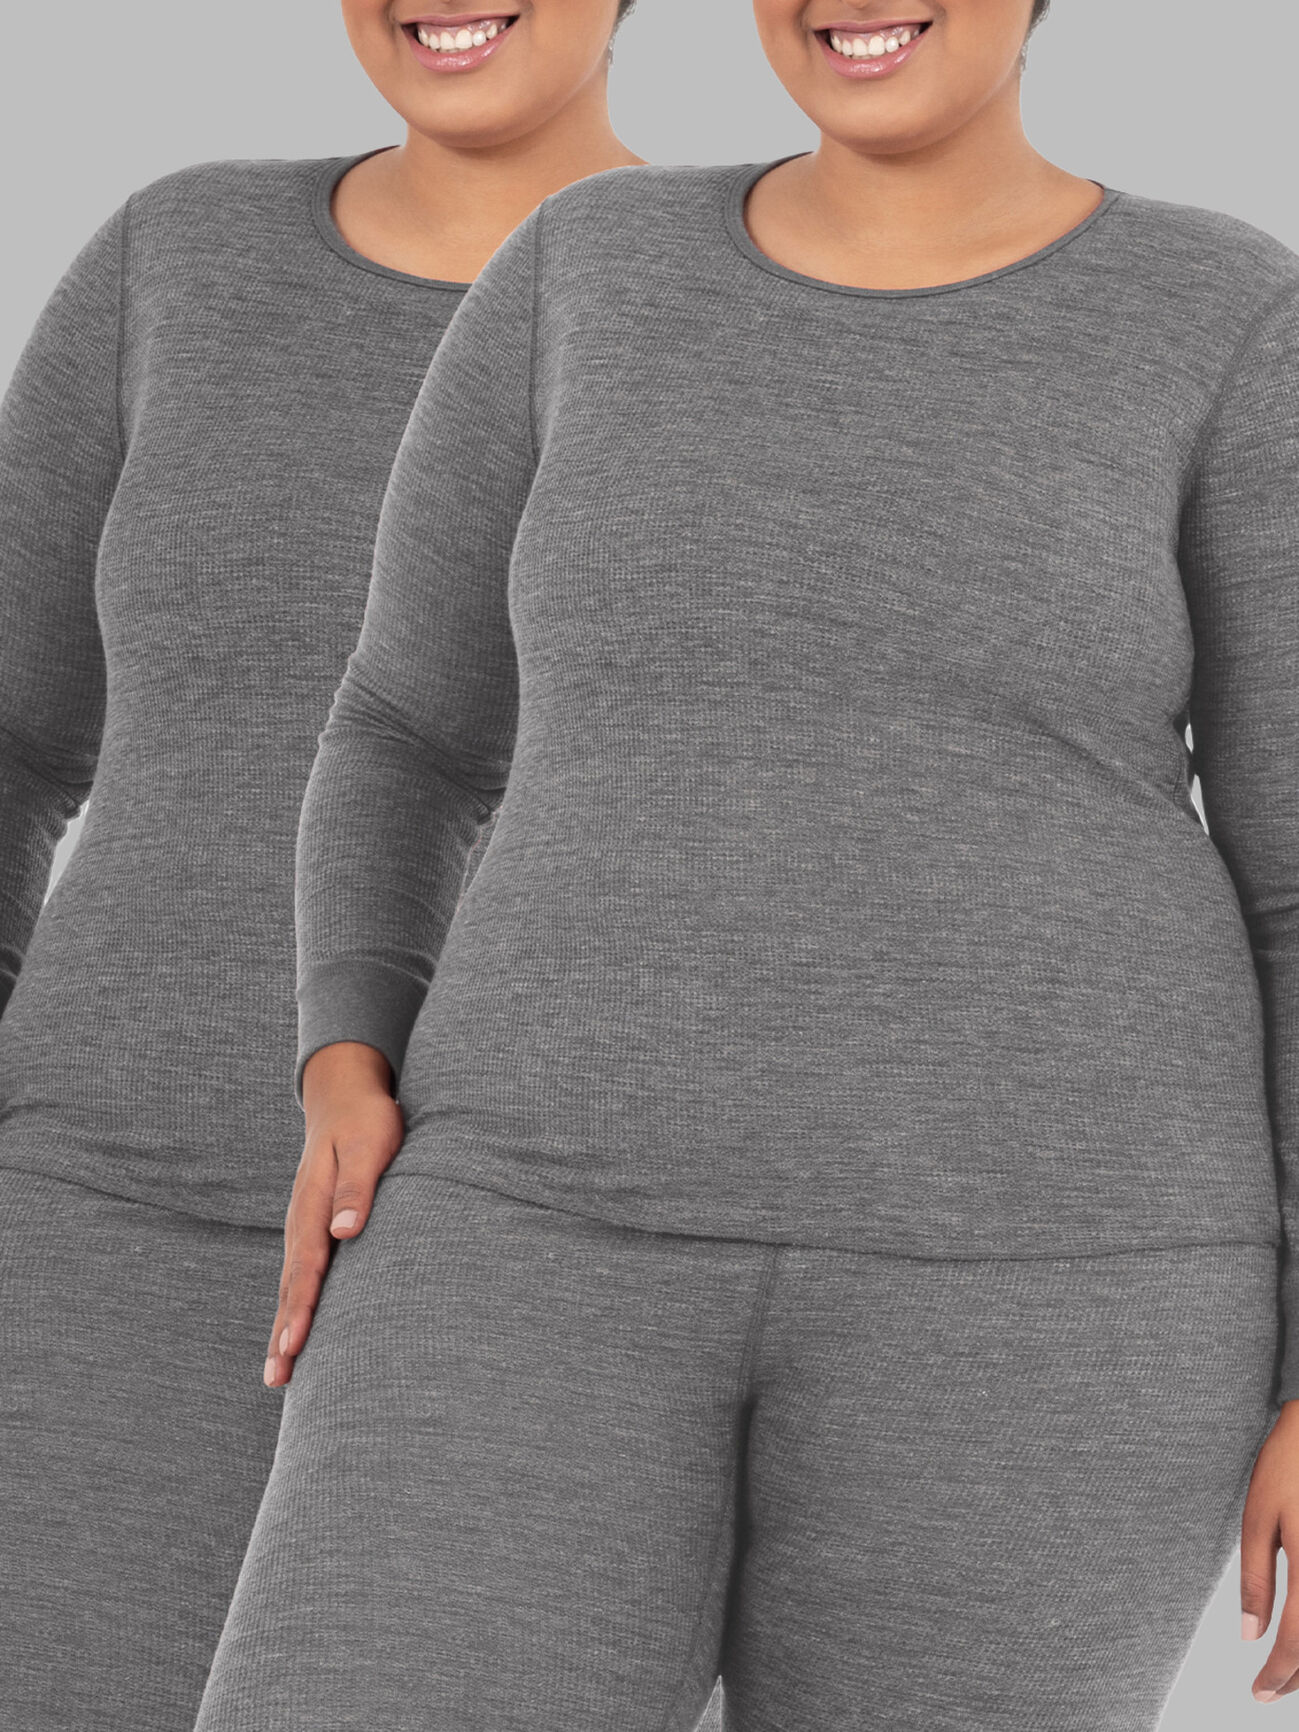 Fruit of the Loom Women's and Women's Plus Long Underwear Thermal Waffle  Top and Bottom Set